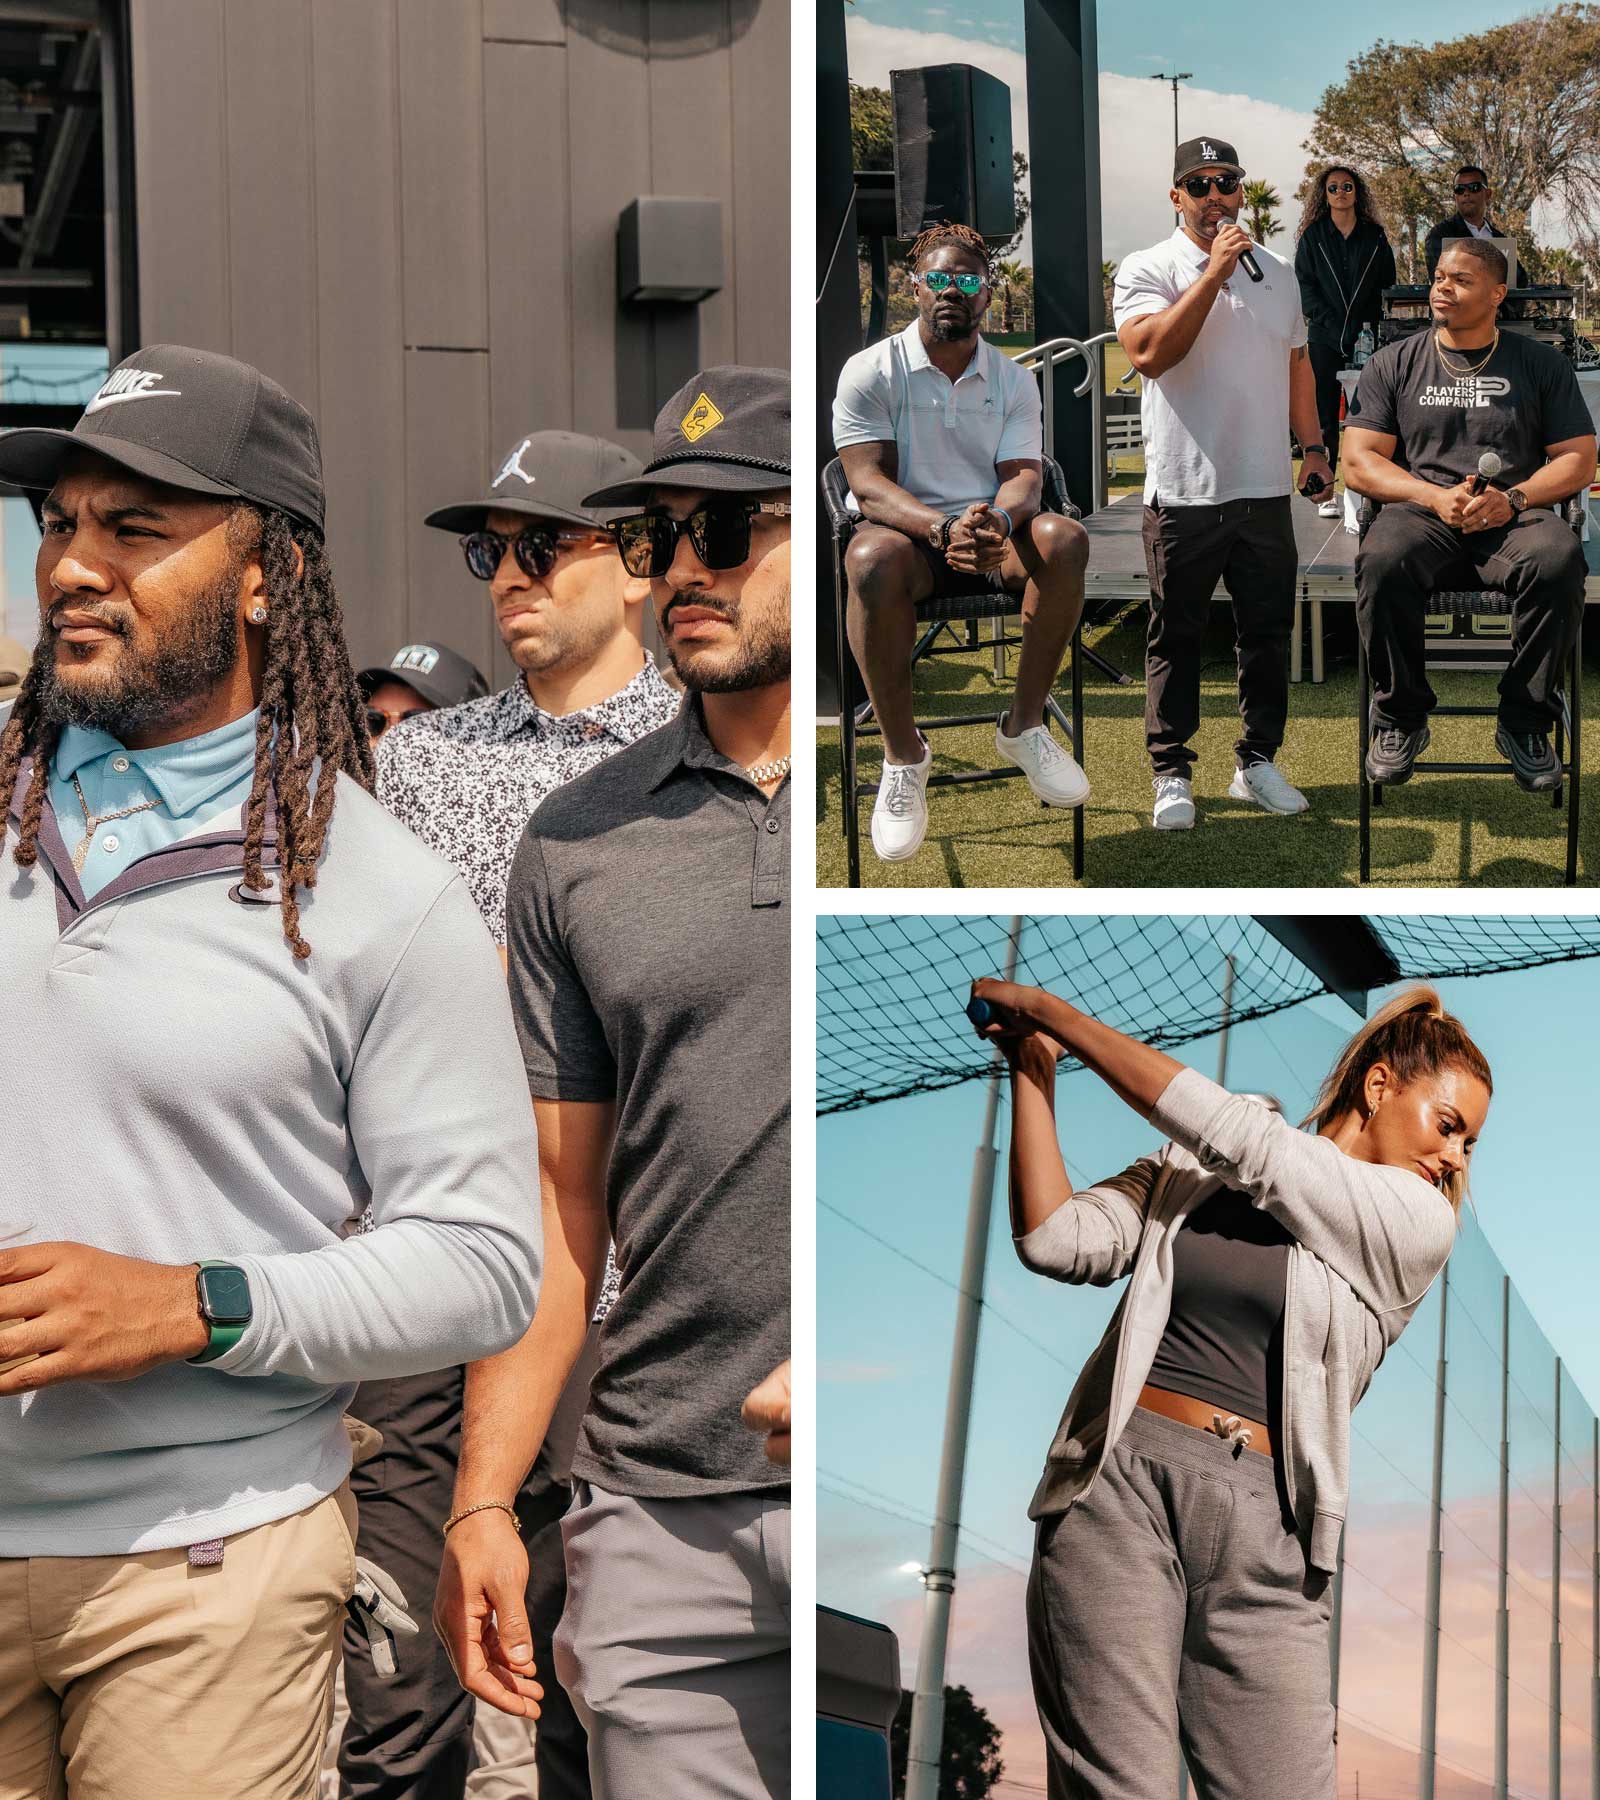 Athletes And Entertainers Unite For Golf And Diversity At Change The Game